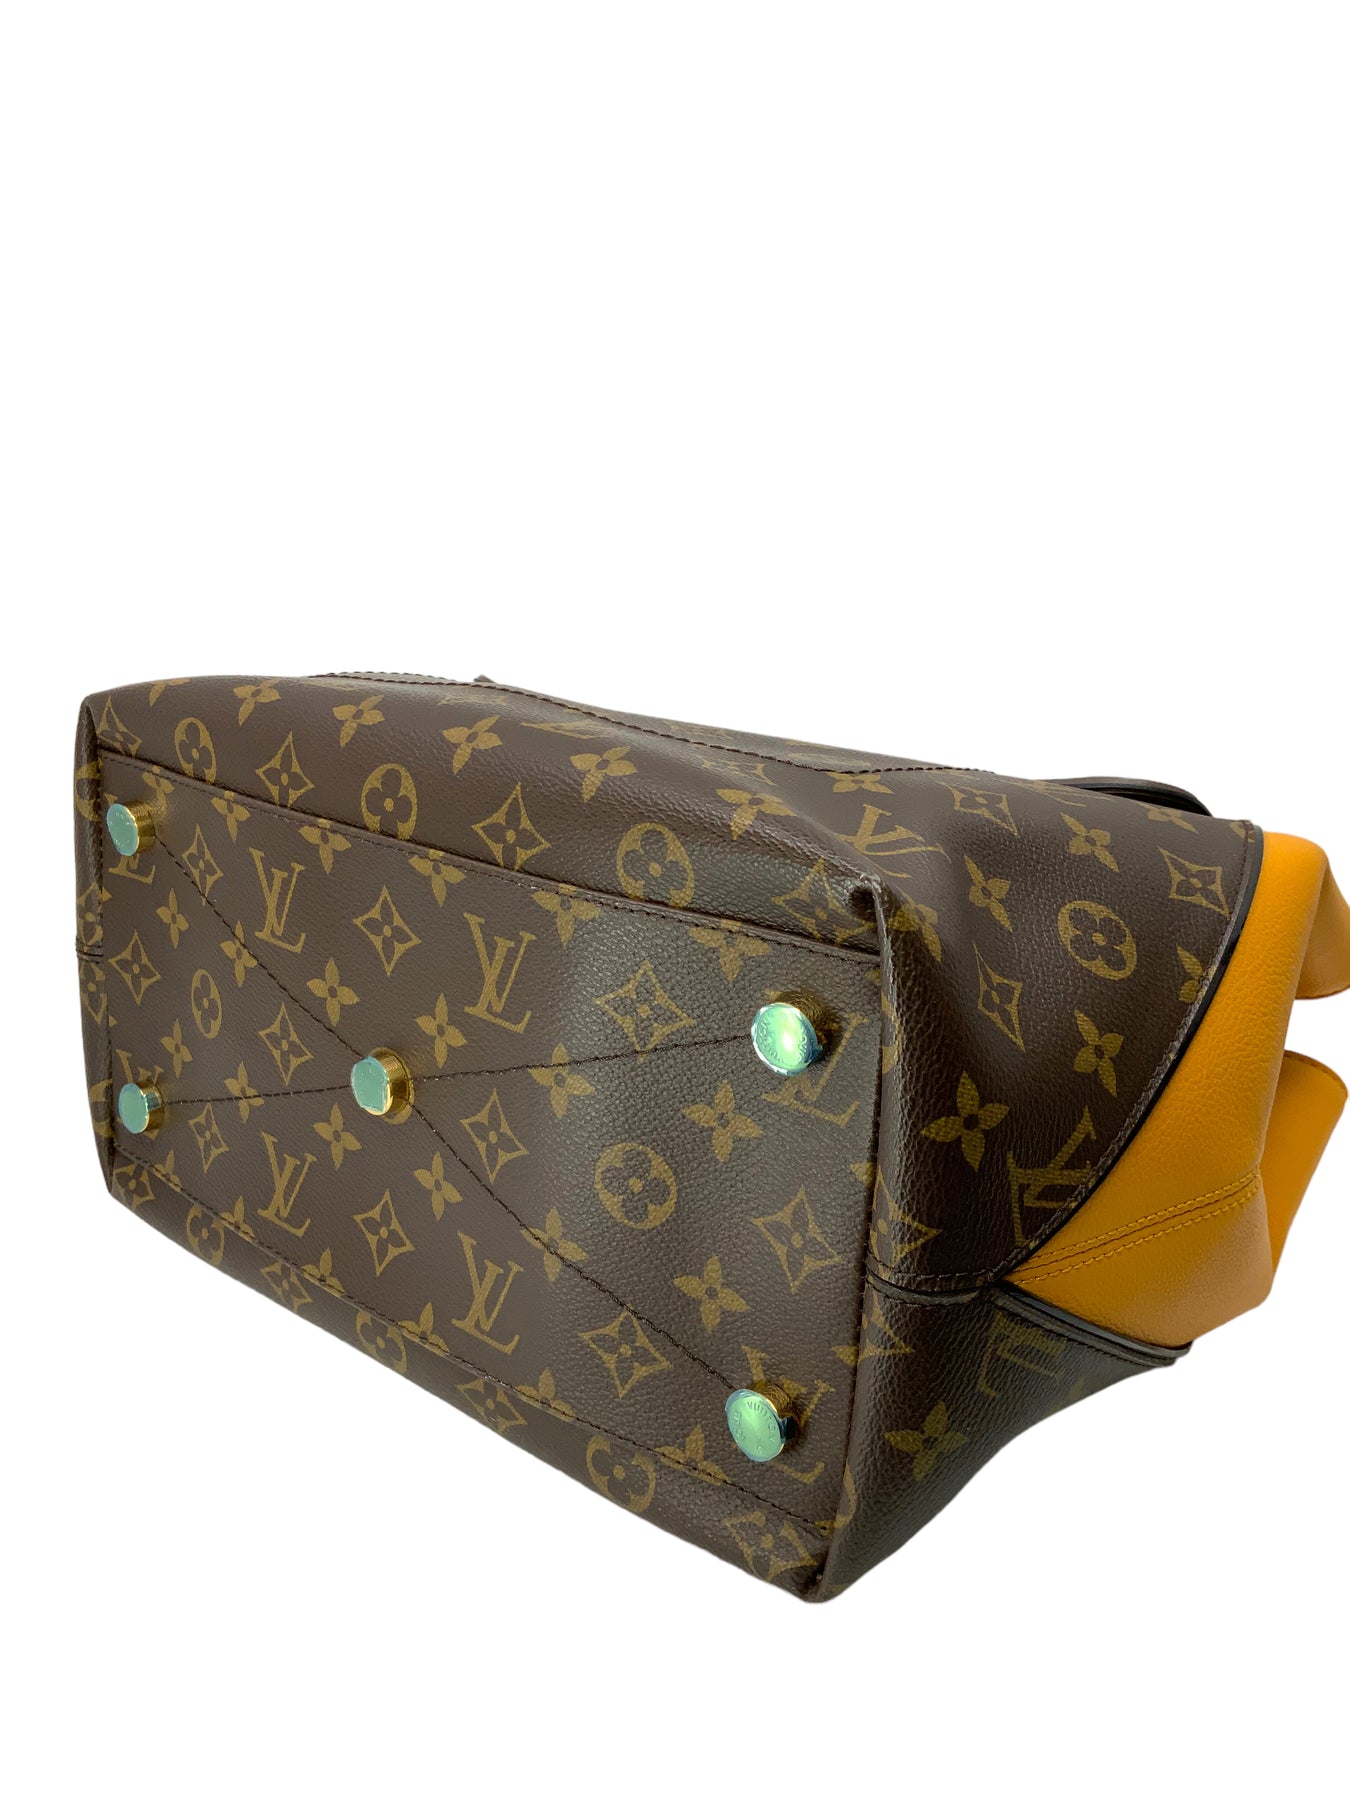 Louis Vuitton Majestueux Tote Monogram Canvas and Exotics PM at 1stDibs